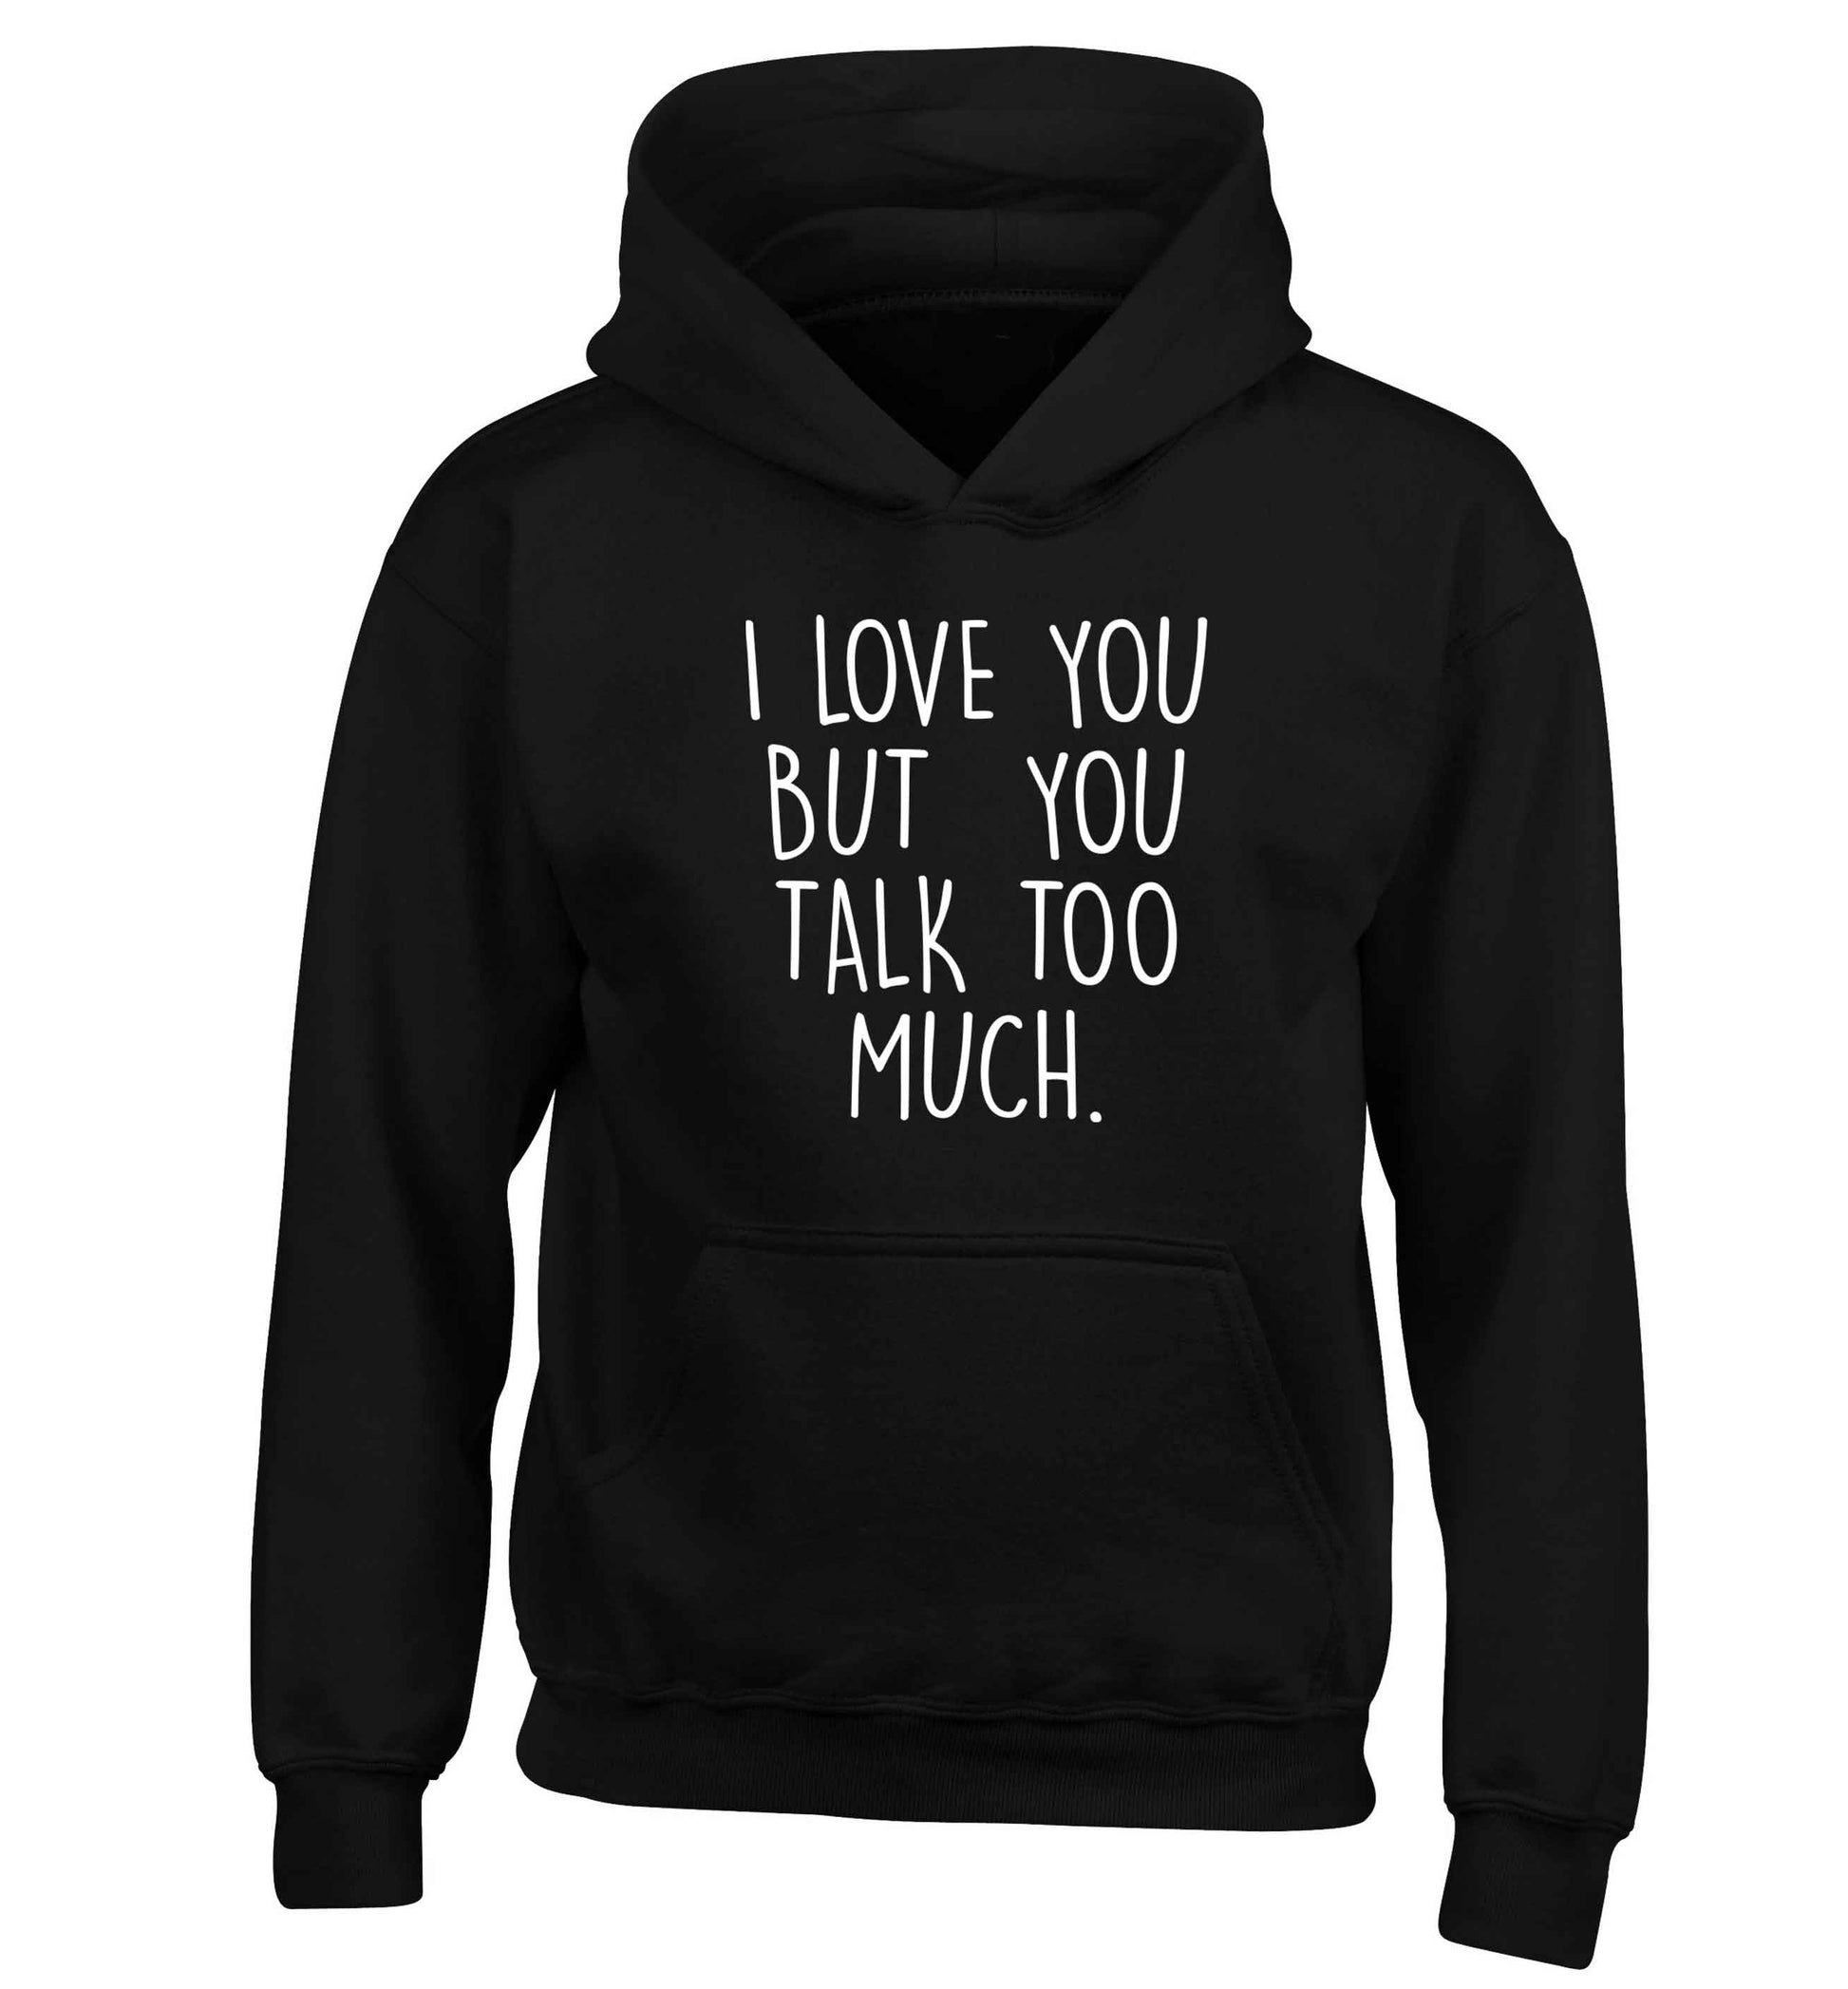 I love you but you talk too much children's black hoodie 12-13 Years